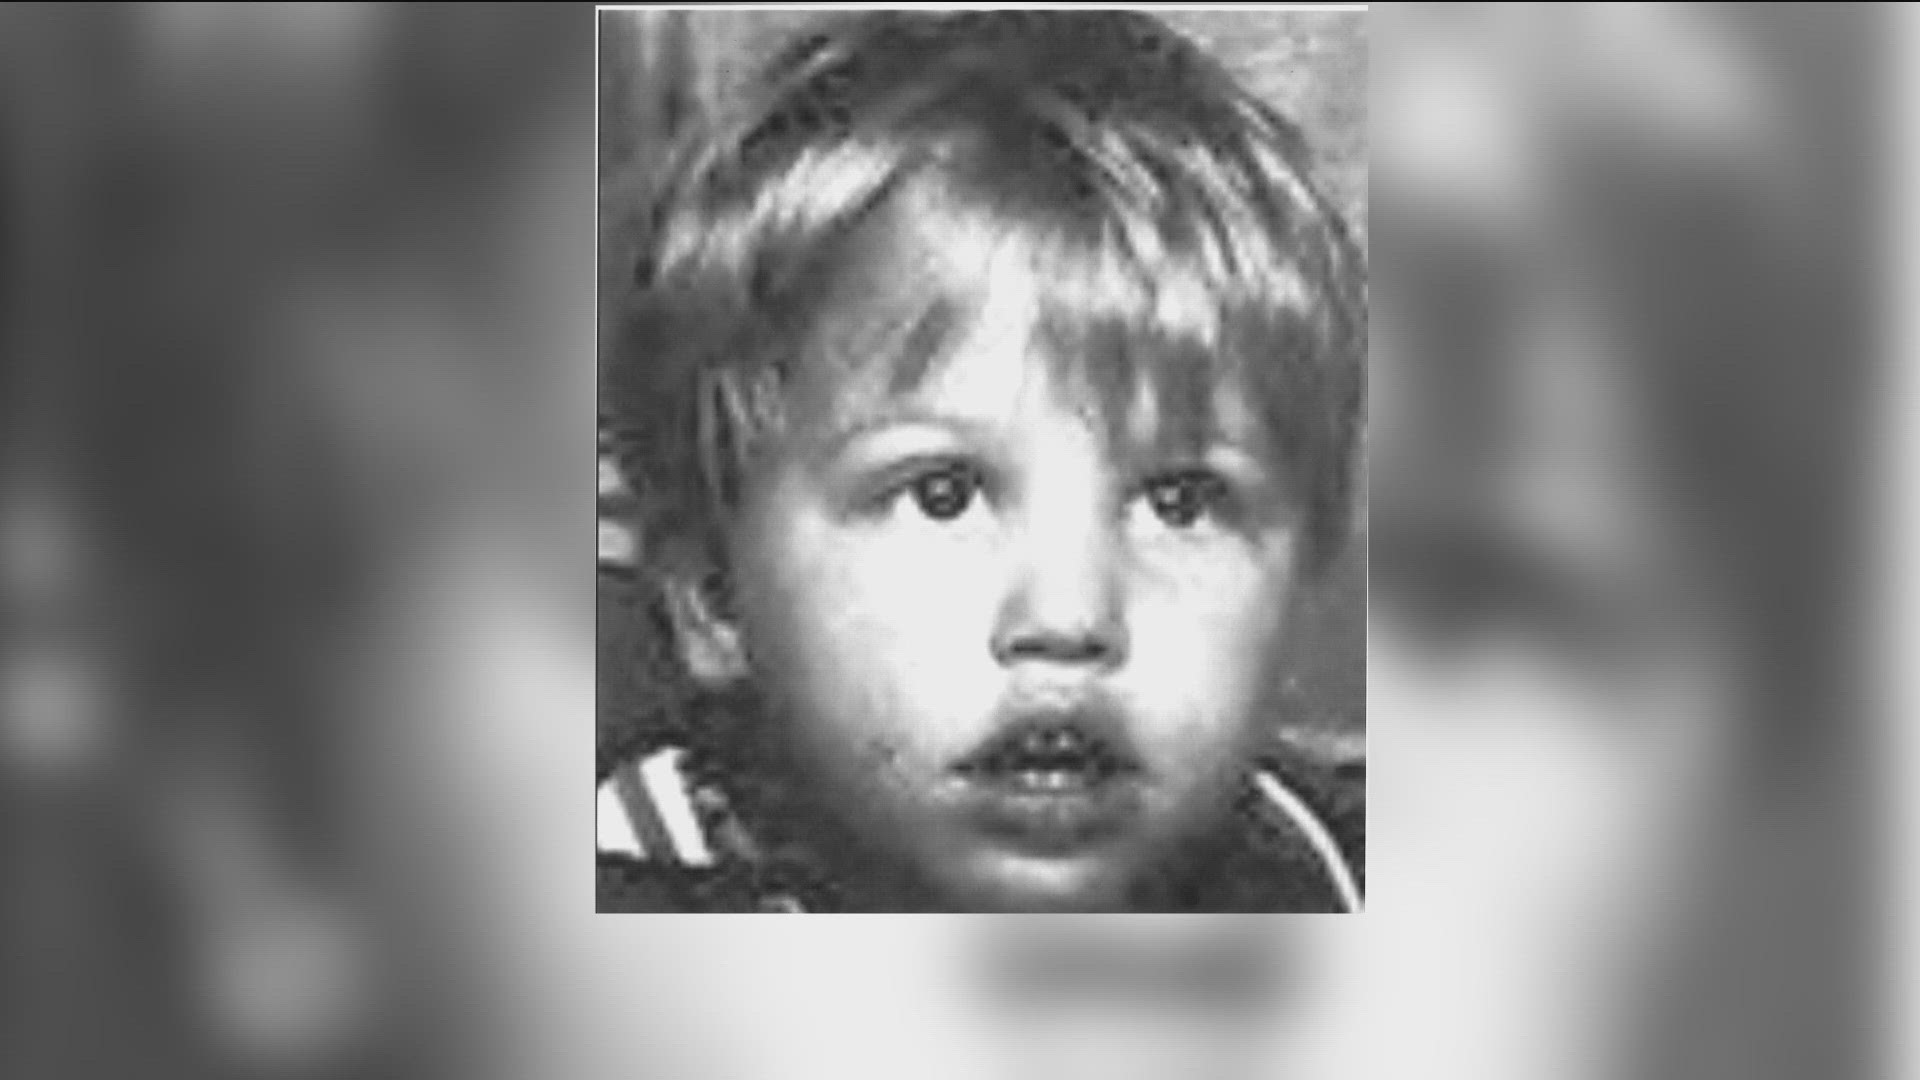 Jason Cannon was 3 years old when he disappeared. His mom said she grabbed him a jacket from the house, when she came back outside, he was gone.